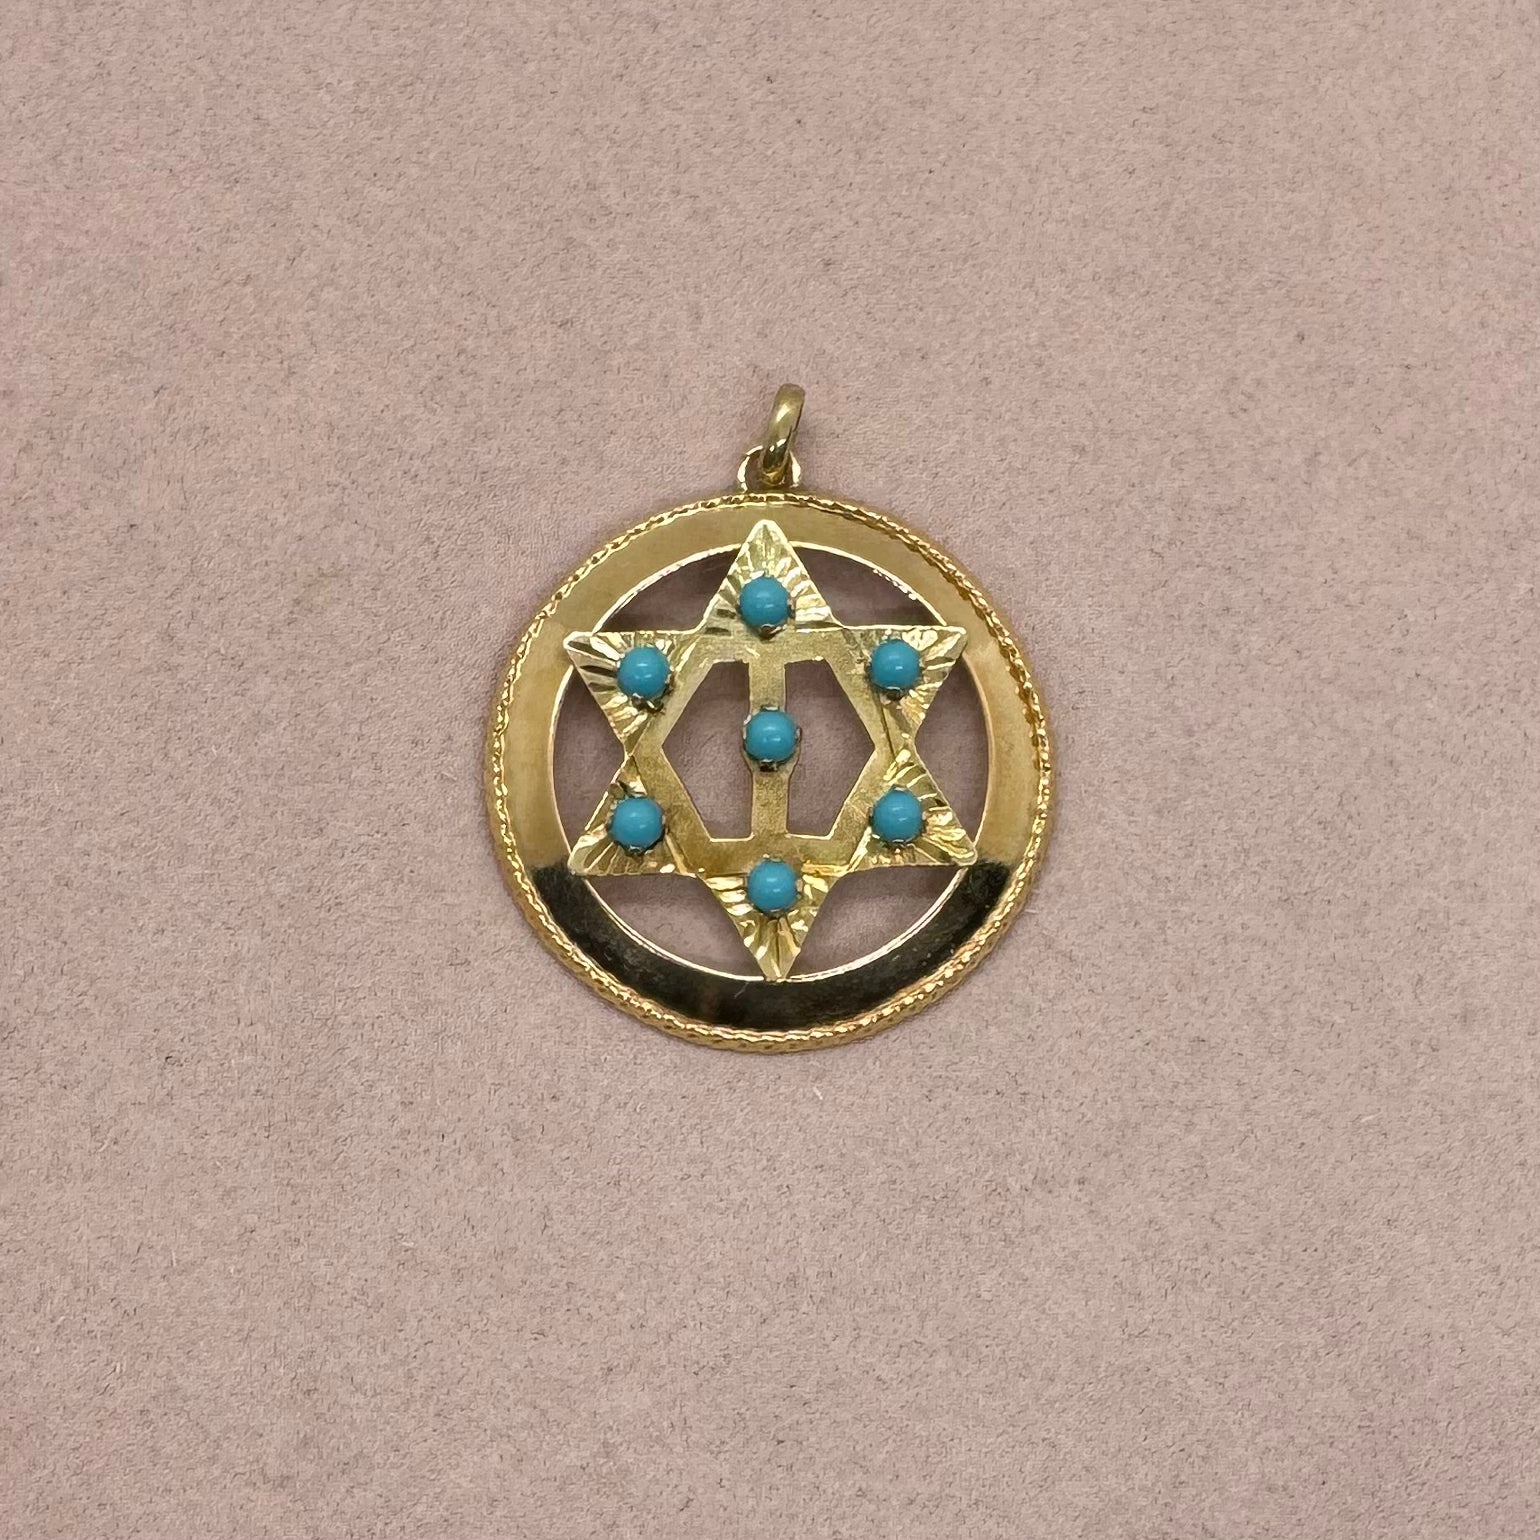 Star of David Medallion with Stones